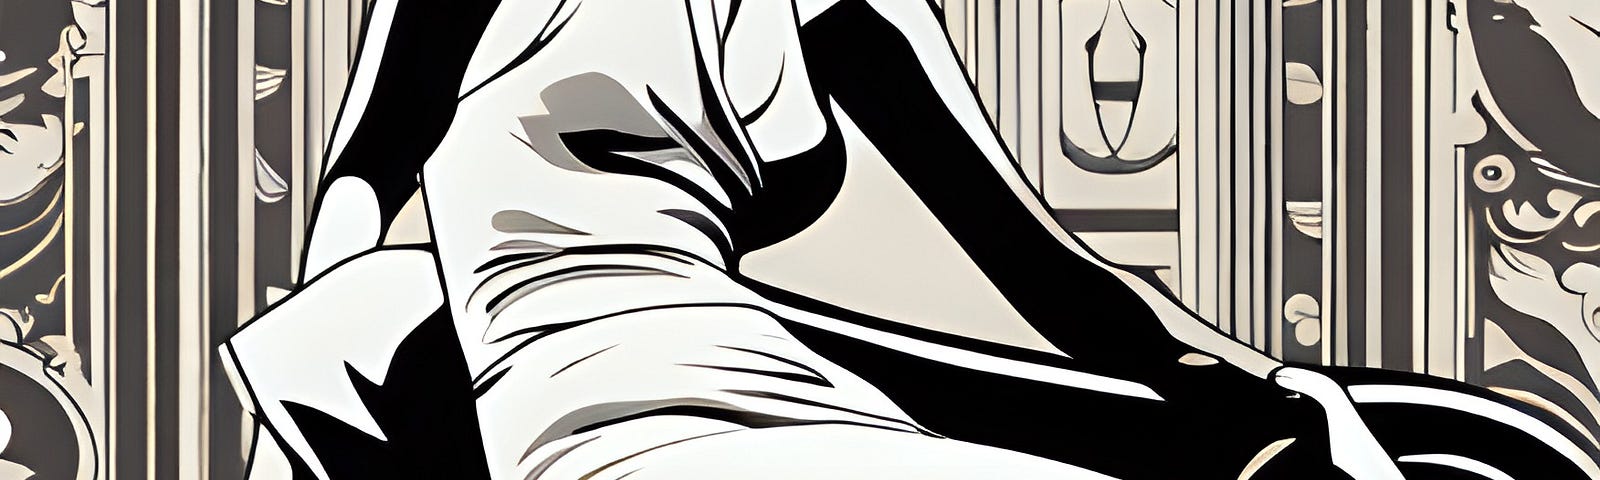 black and cream art of a young woman sitting on a low scroll-back chair against an art deco scrollwork background.